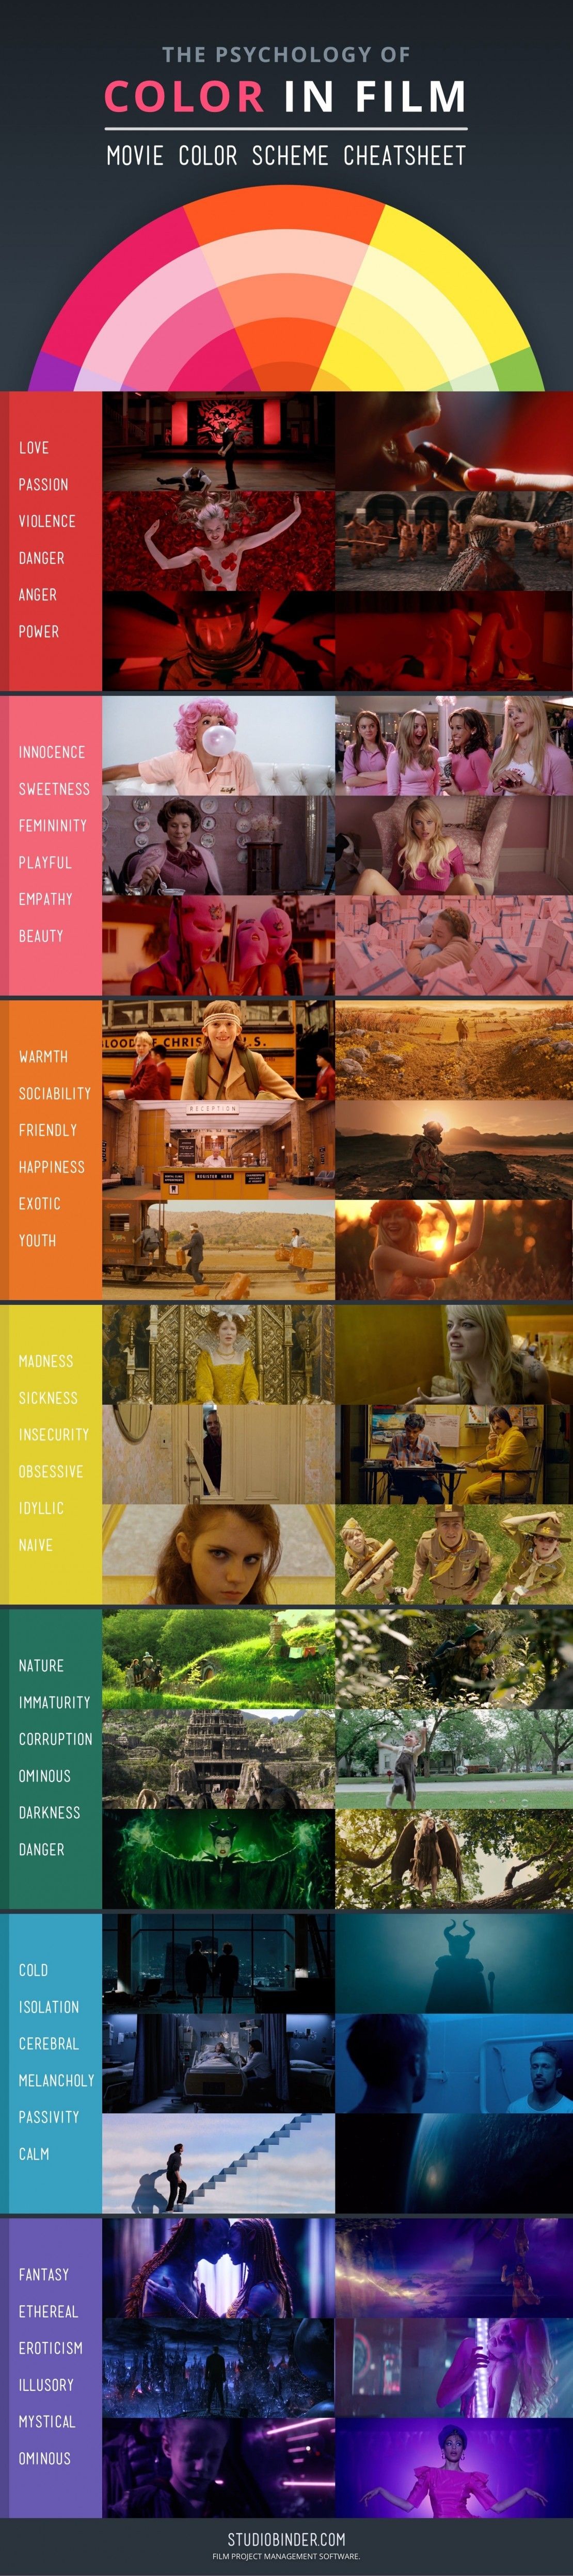 Cinematography in the ST - Influences, motifs, and techniques  Color_theory